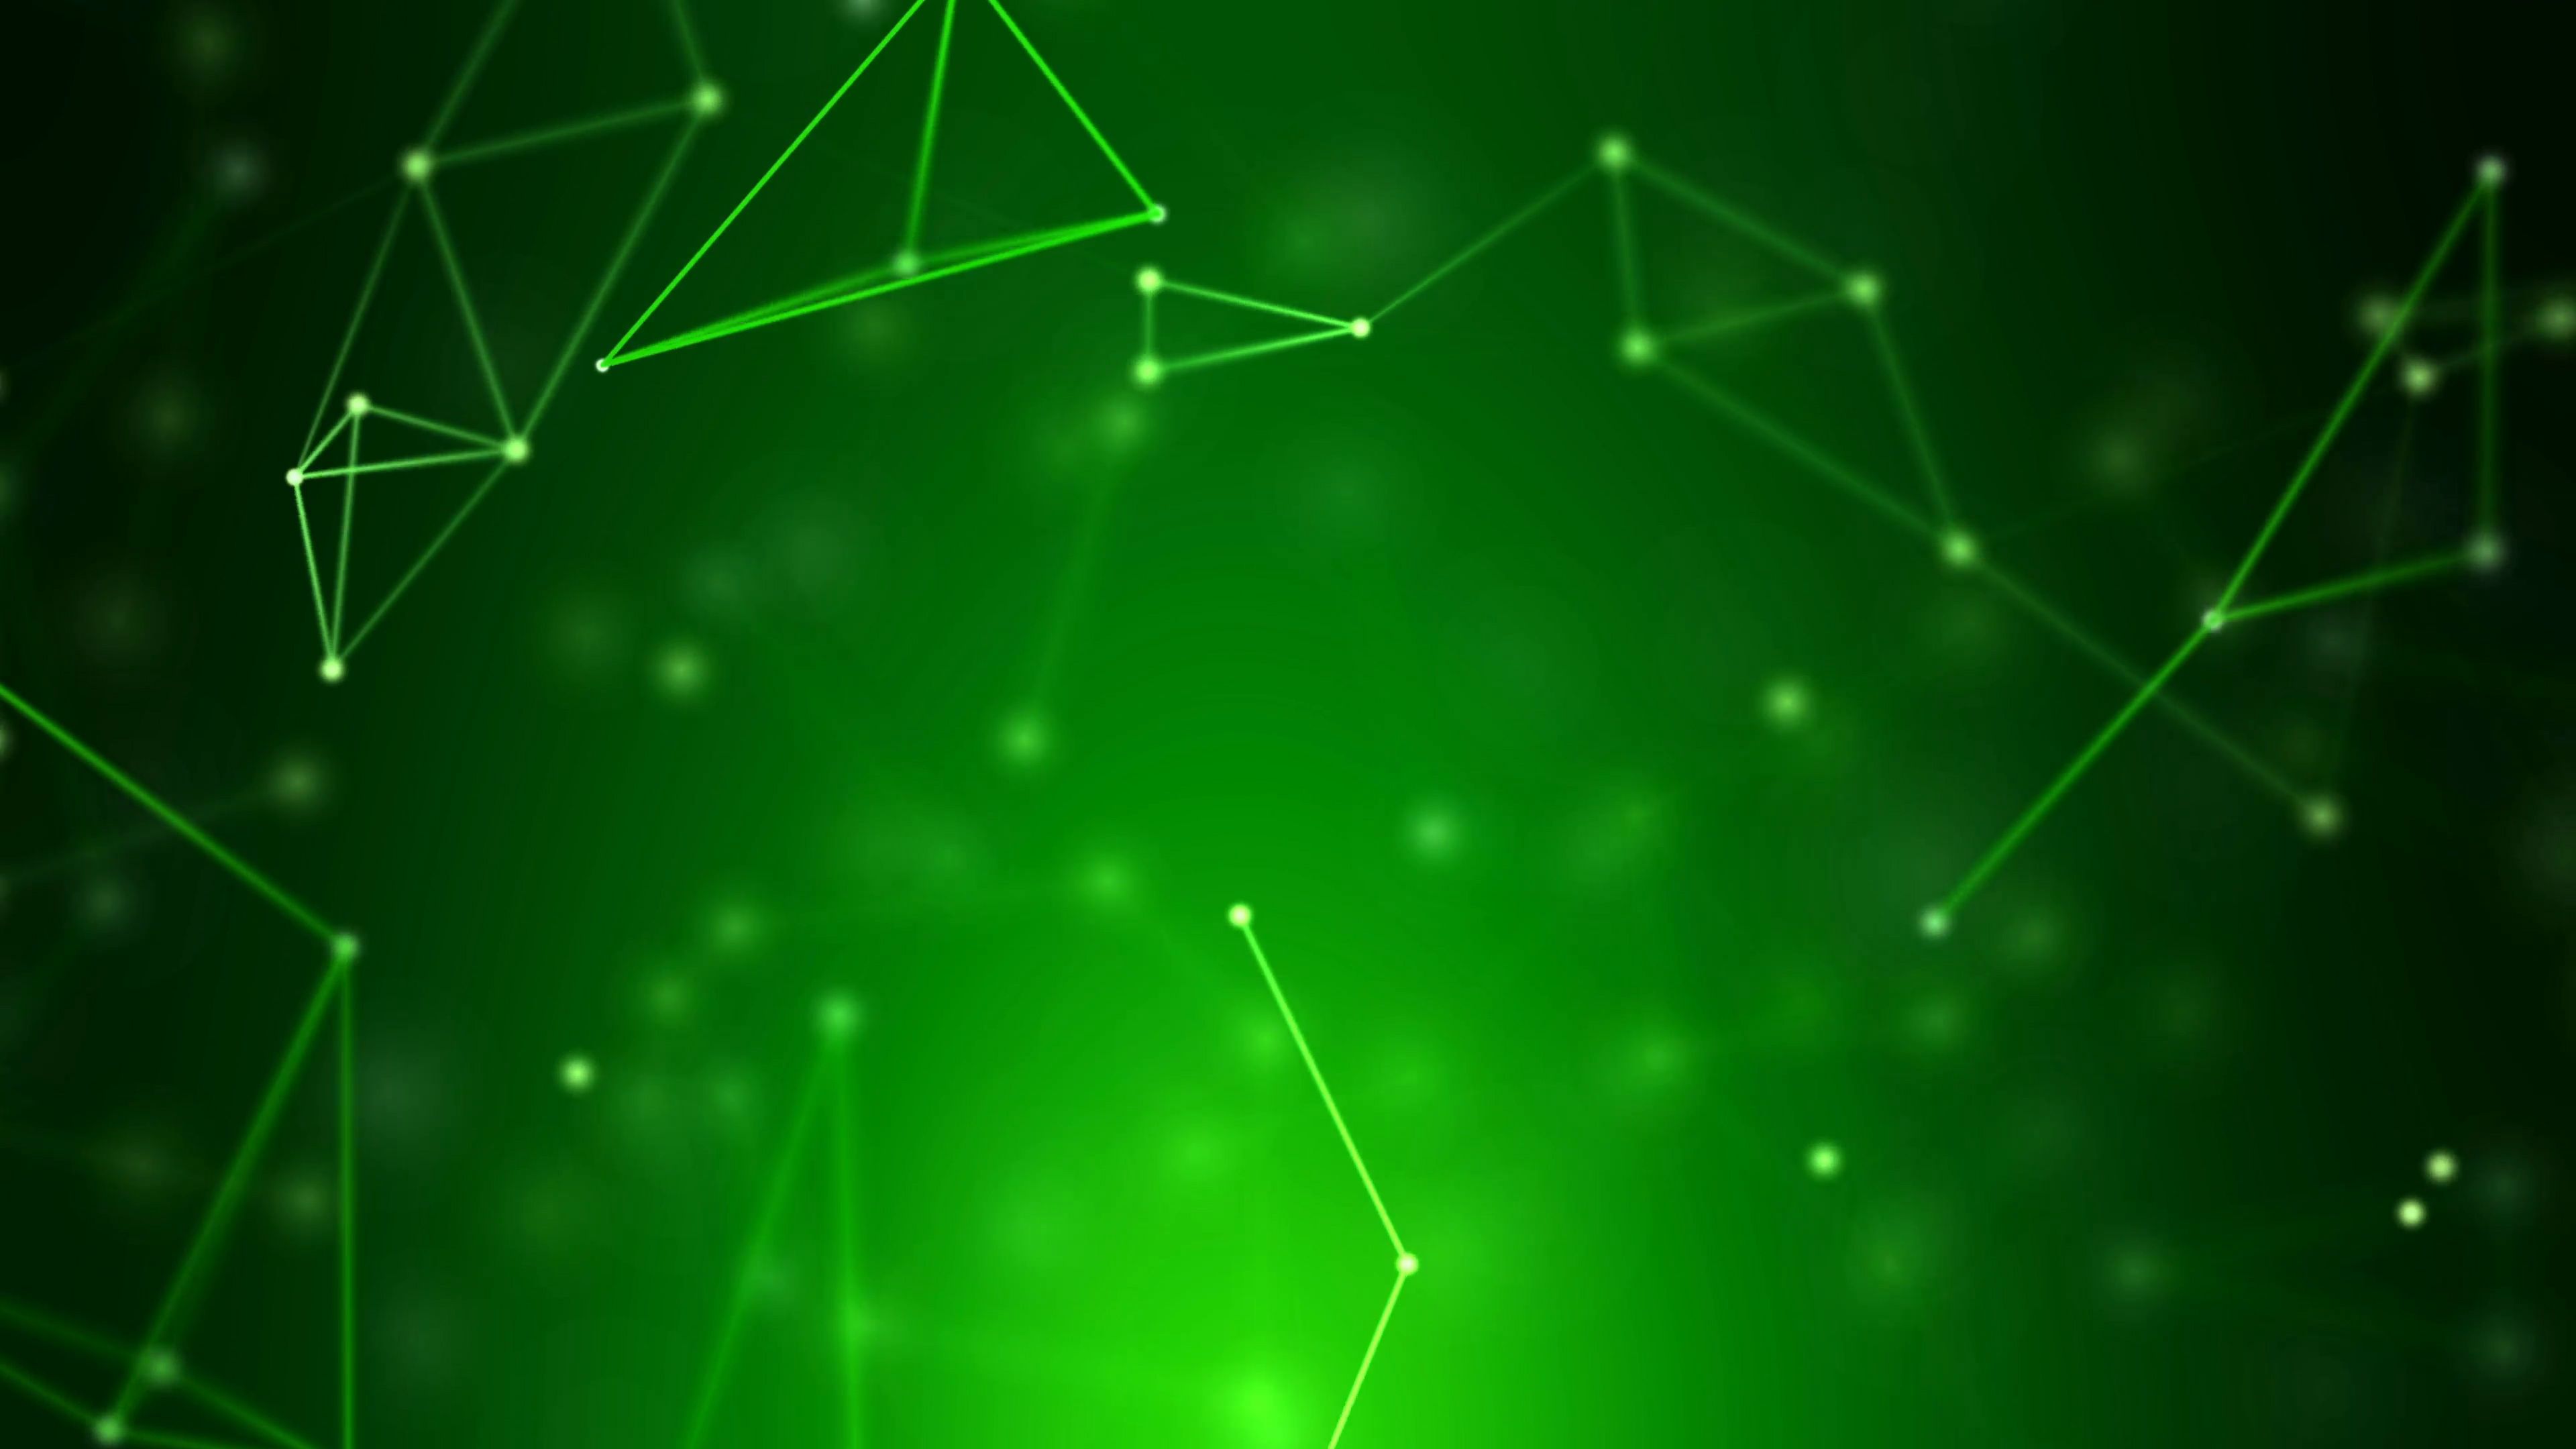 Green Wallpaper HD in 4K with Abstract Geometric Fractal Lines